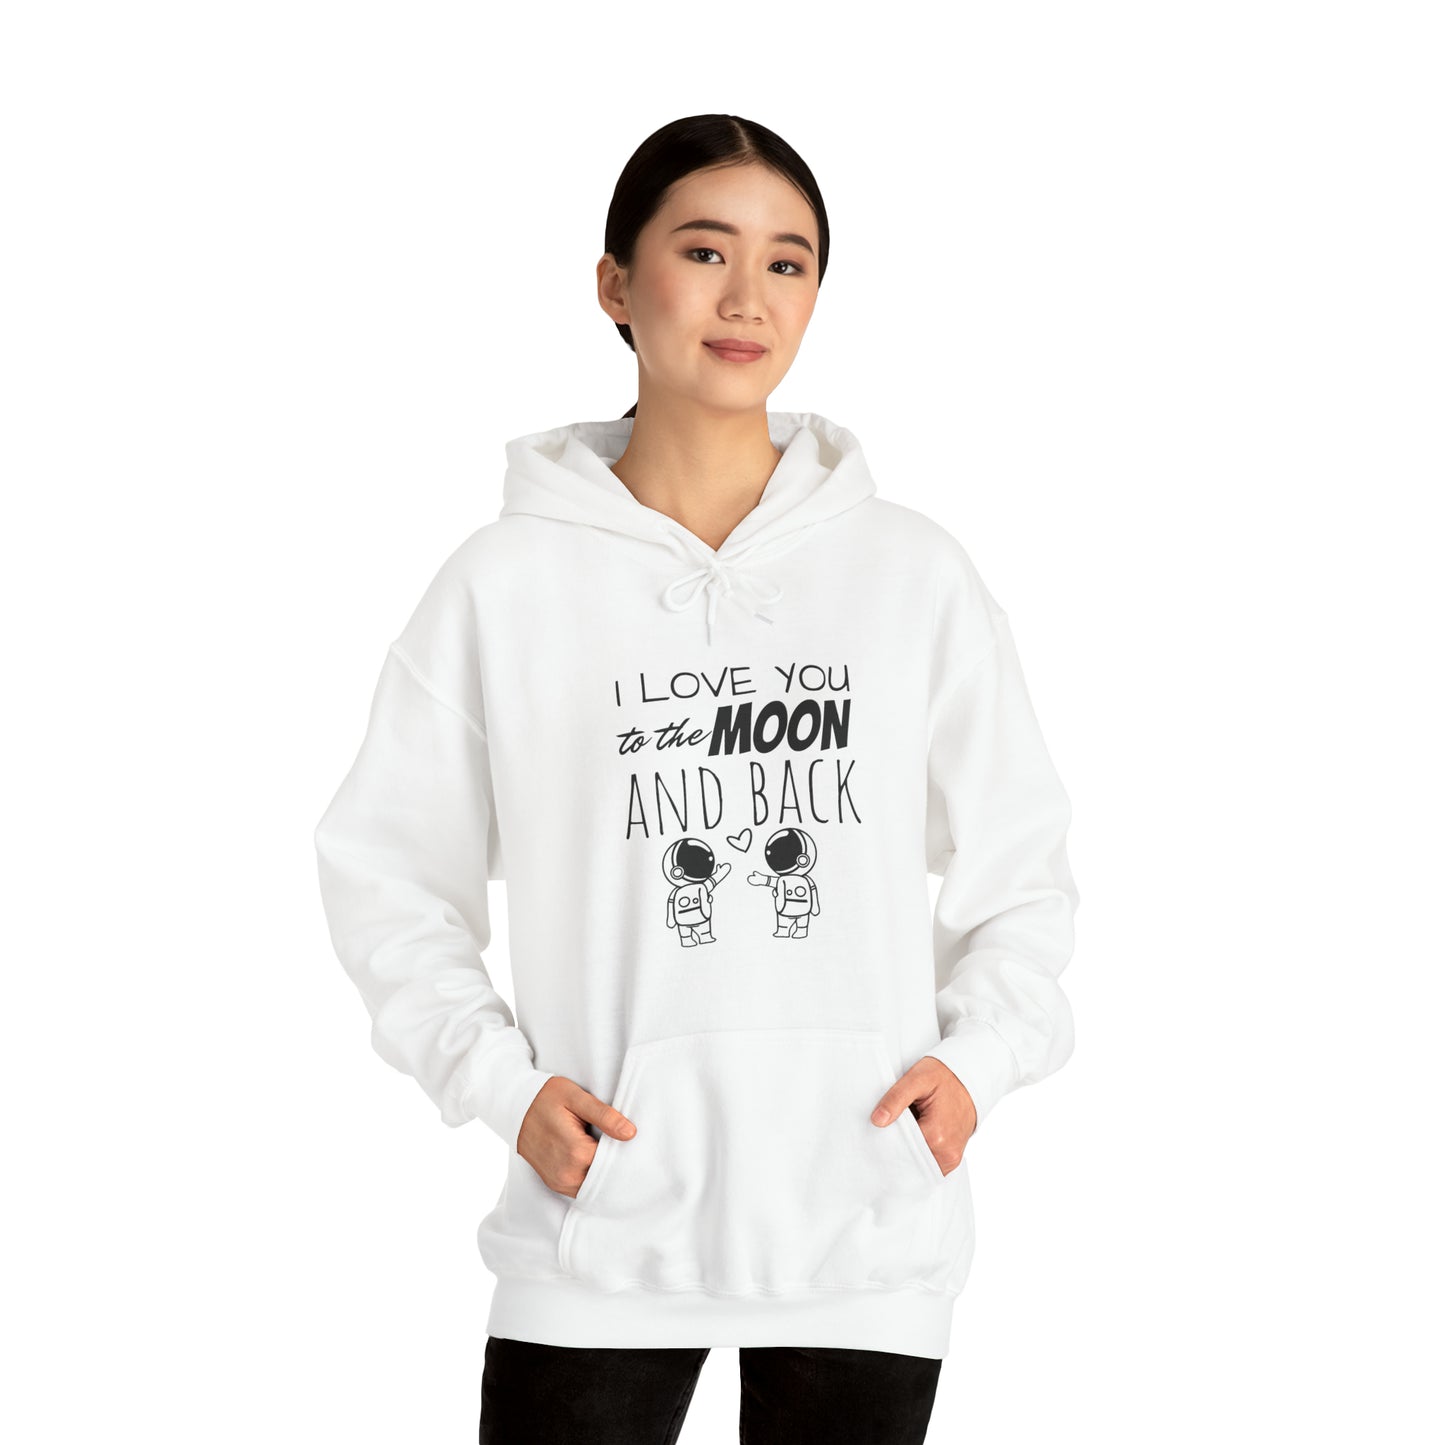 To the Moon - Astronaut Hoodie